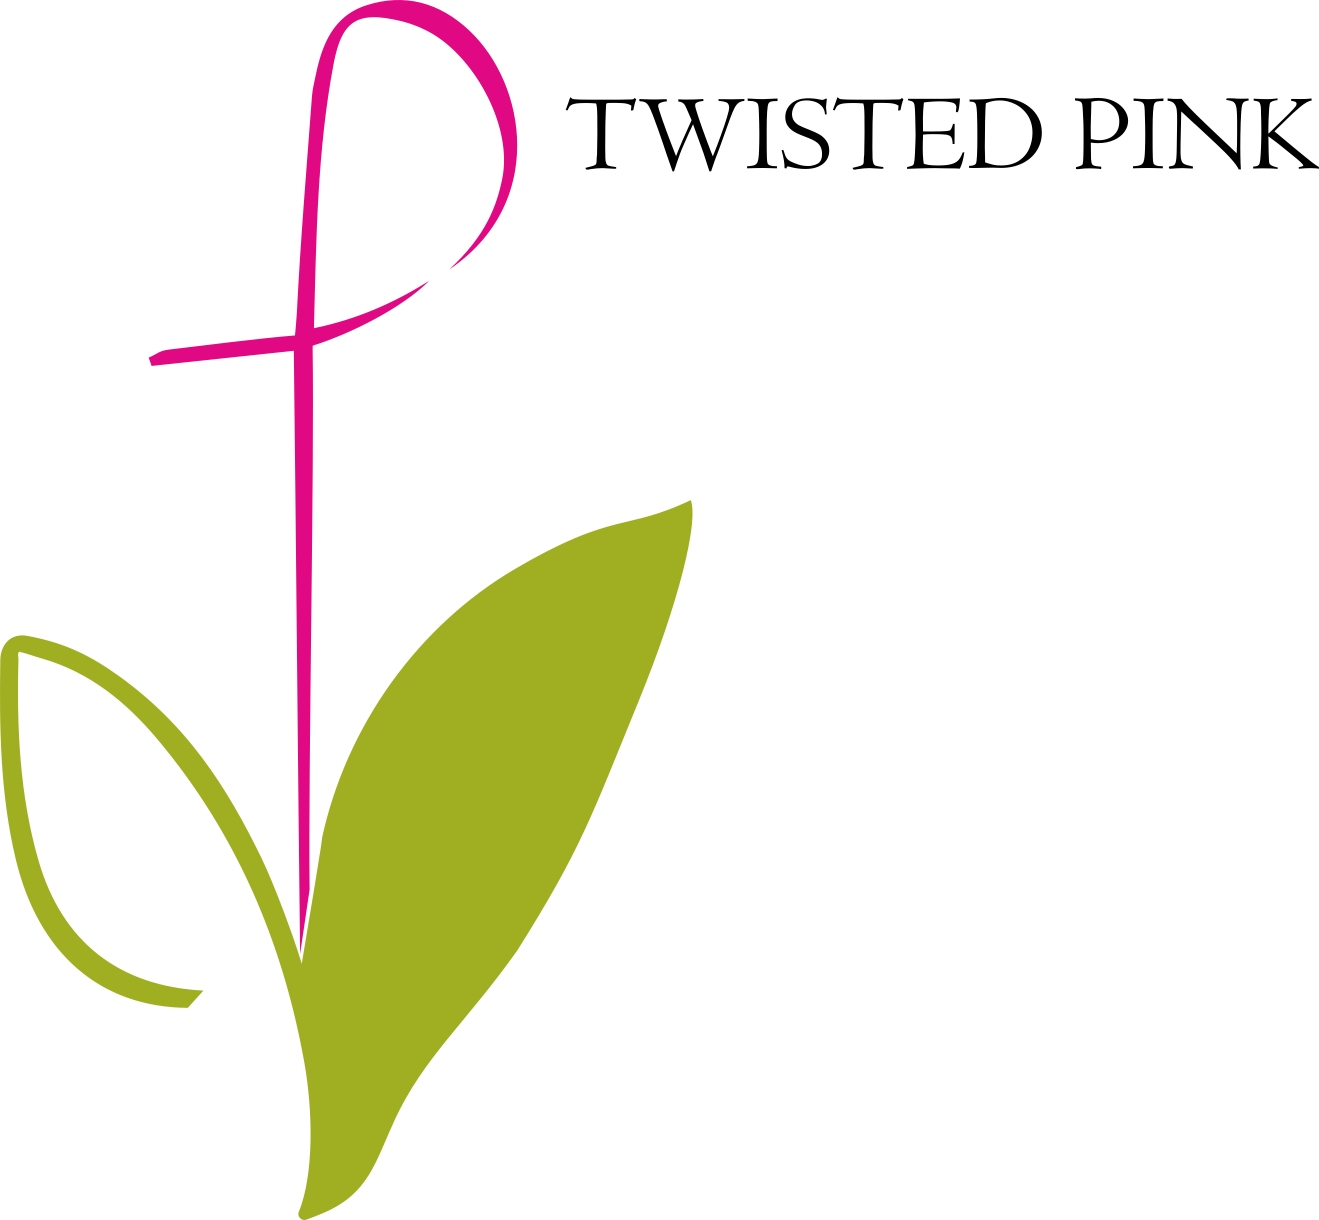 Image of - Twisted Pink